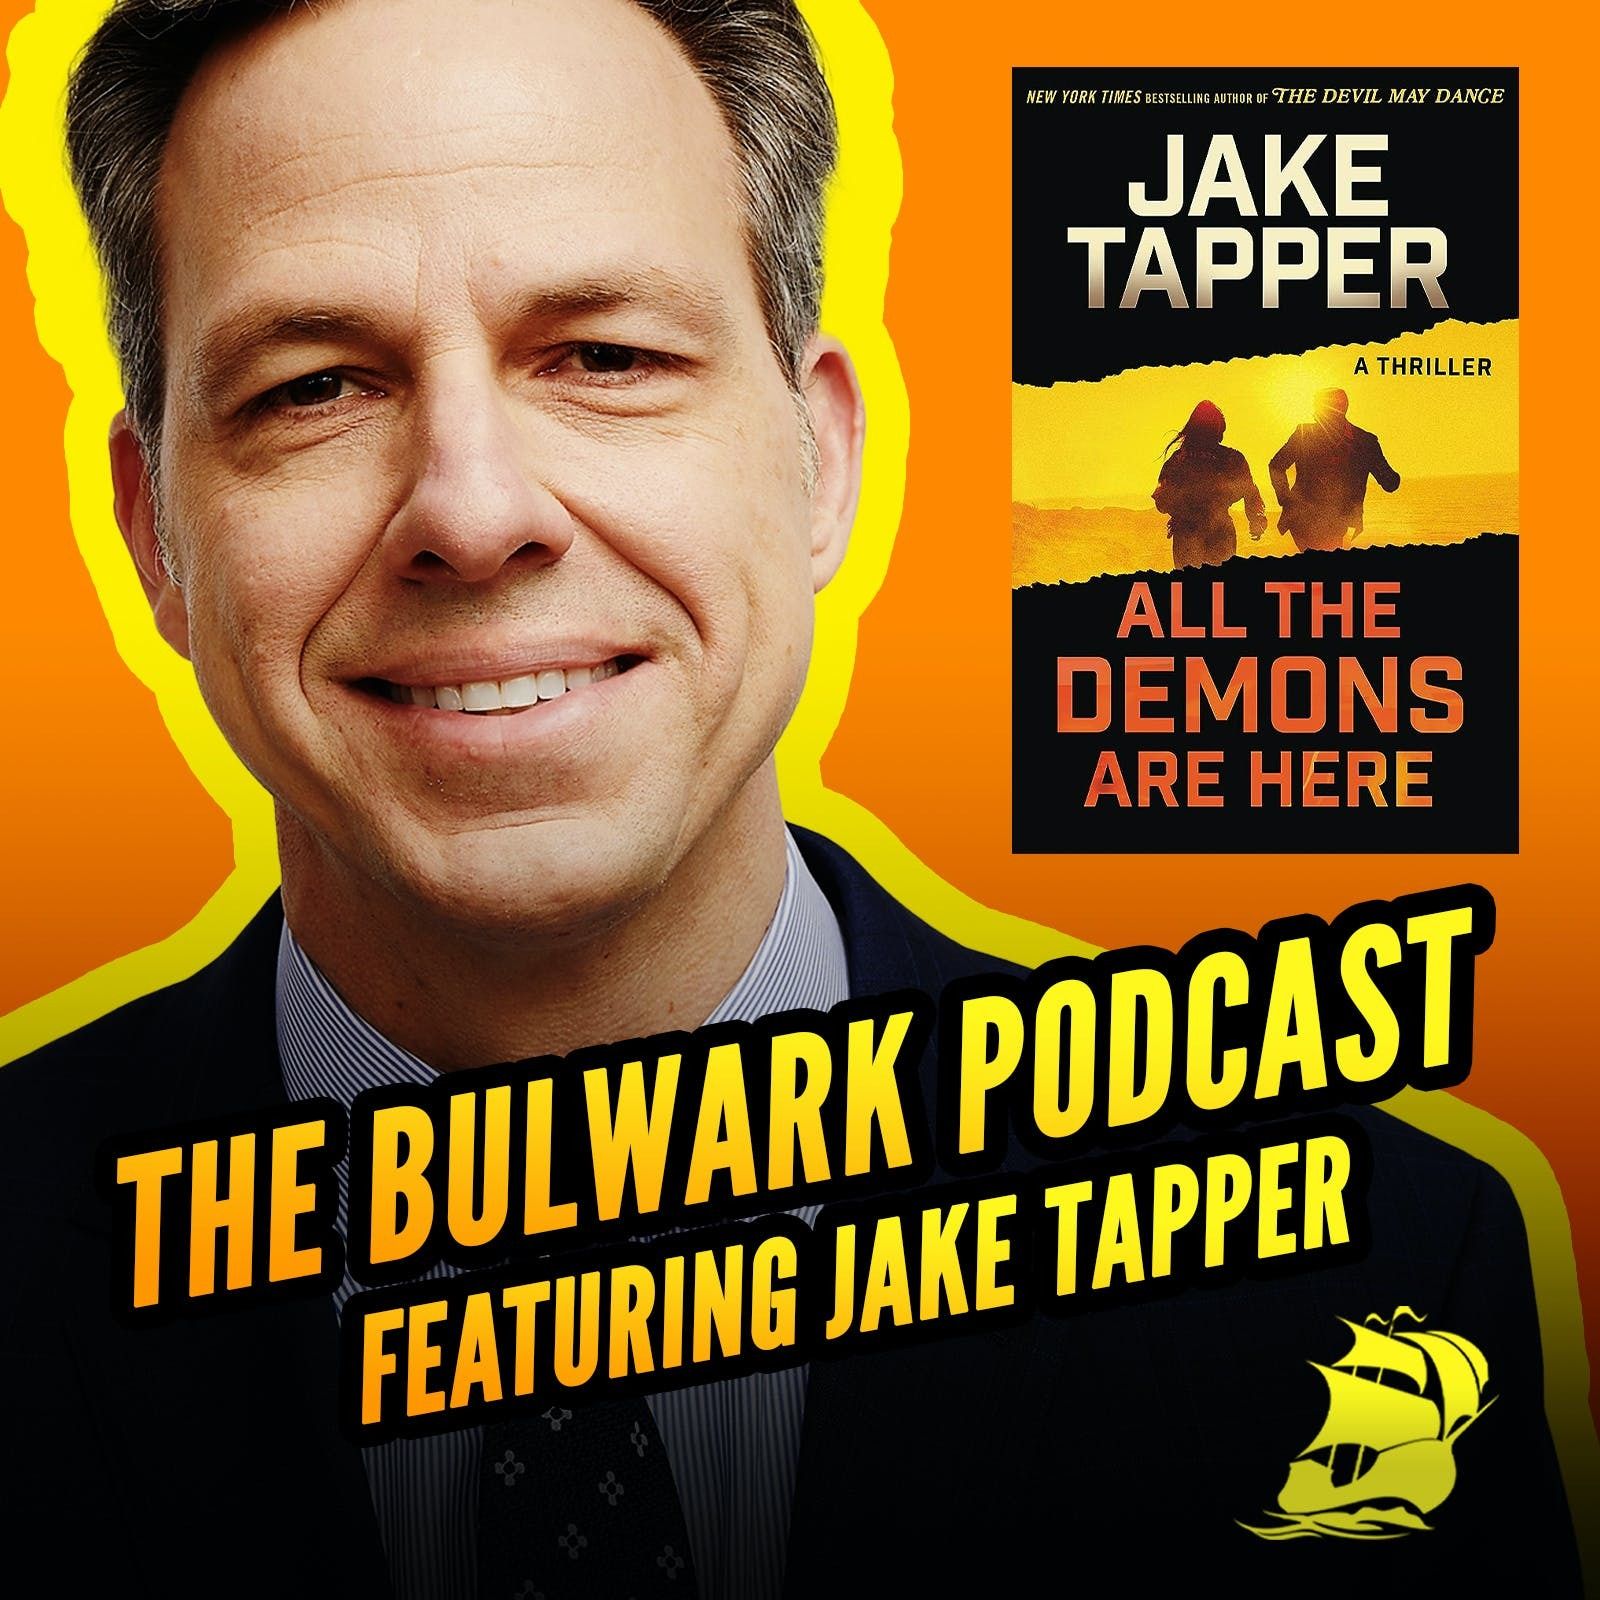 Jake Tapper: "All the Demons Are Here" by The Bulwark Podcast